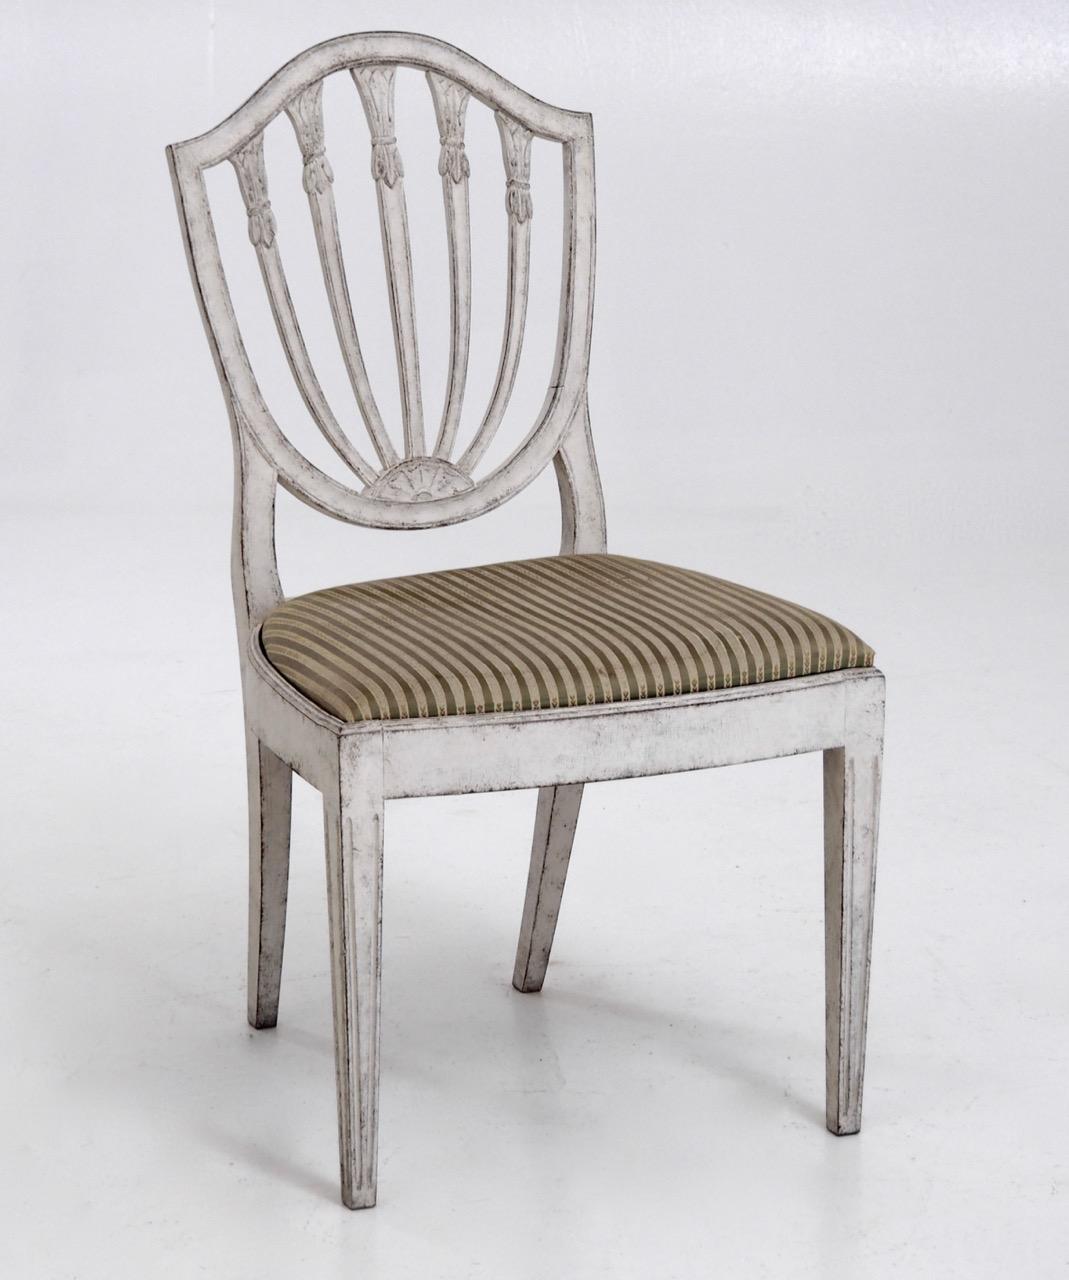 Set of 8 chairs, probably Danish, in the style of C.J. Lillie, 19th century.
Measures: H. 92 H-seat. 45 W. 50 D. 45 cm 
H. 36.2 H-seat. 17.7 W. 19.6 D. 17.7 in.